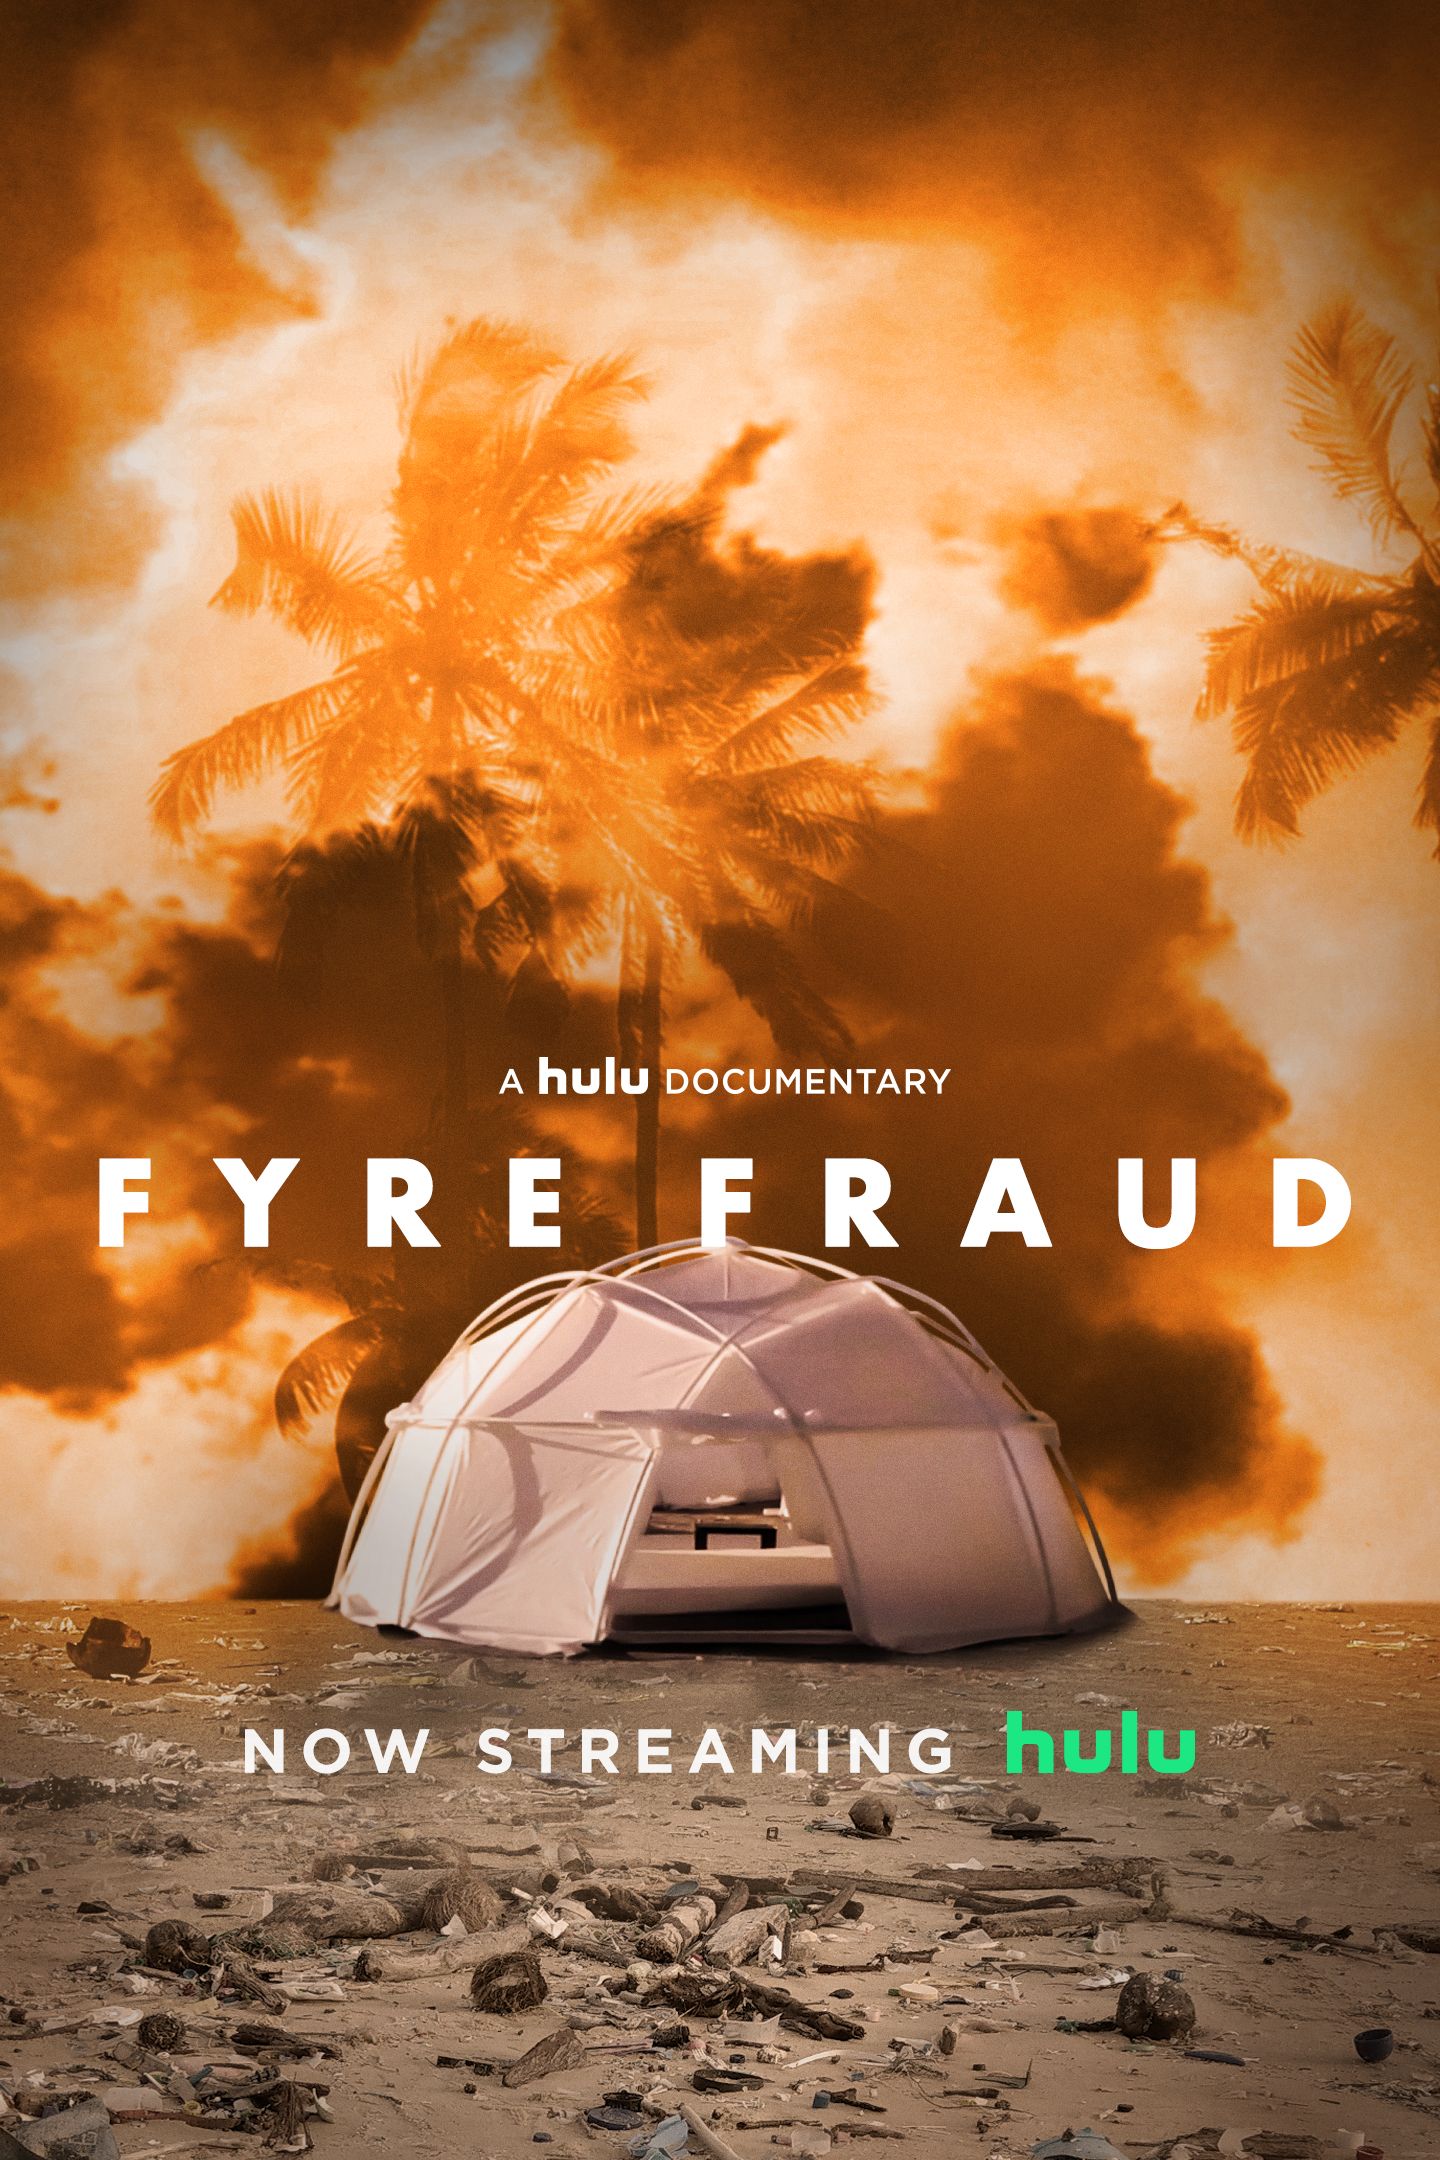 Fyre Fraud Review: Hulu's Documentary Tone Is Too Glib | Collider